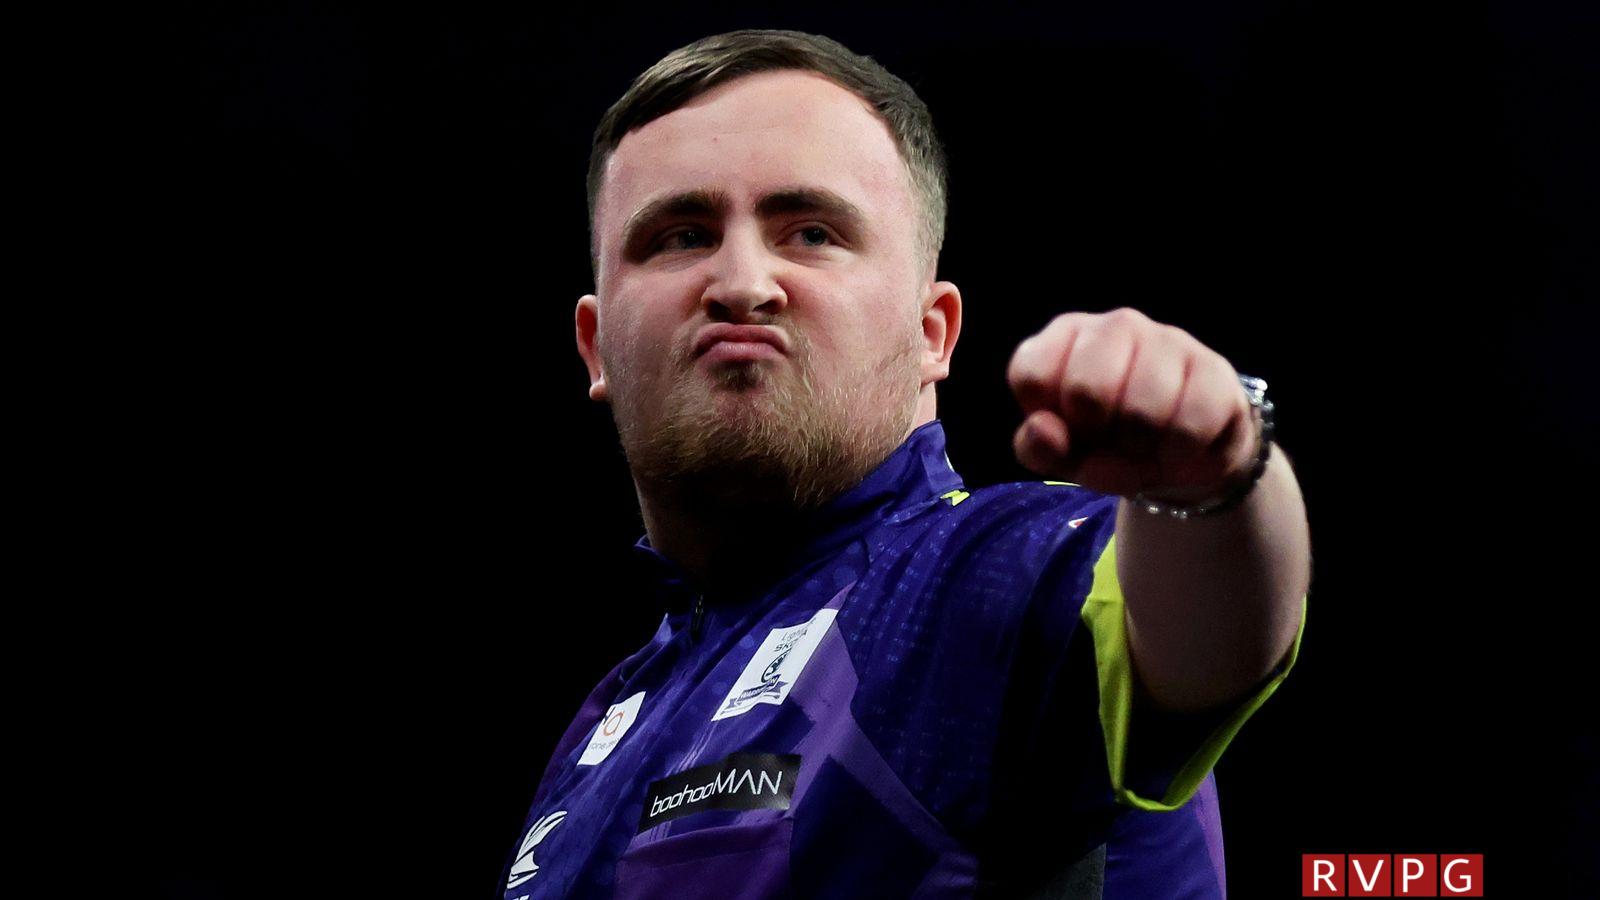 Luke Littler spurs on the Liverpool crowd by overcoming boos to record an evening win in Premier League Darts